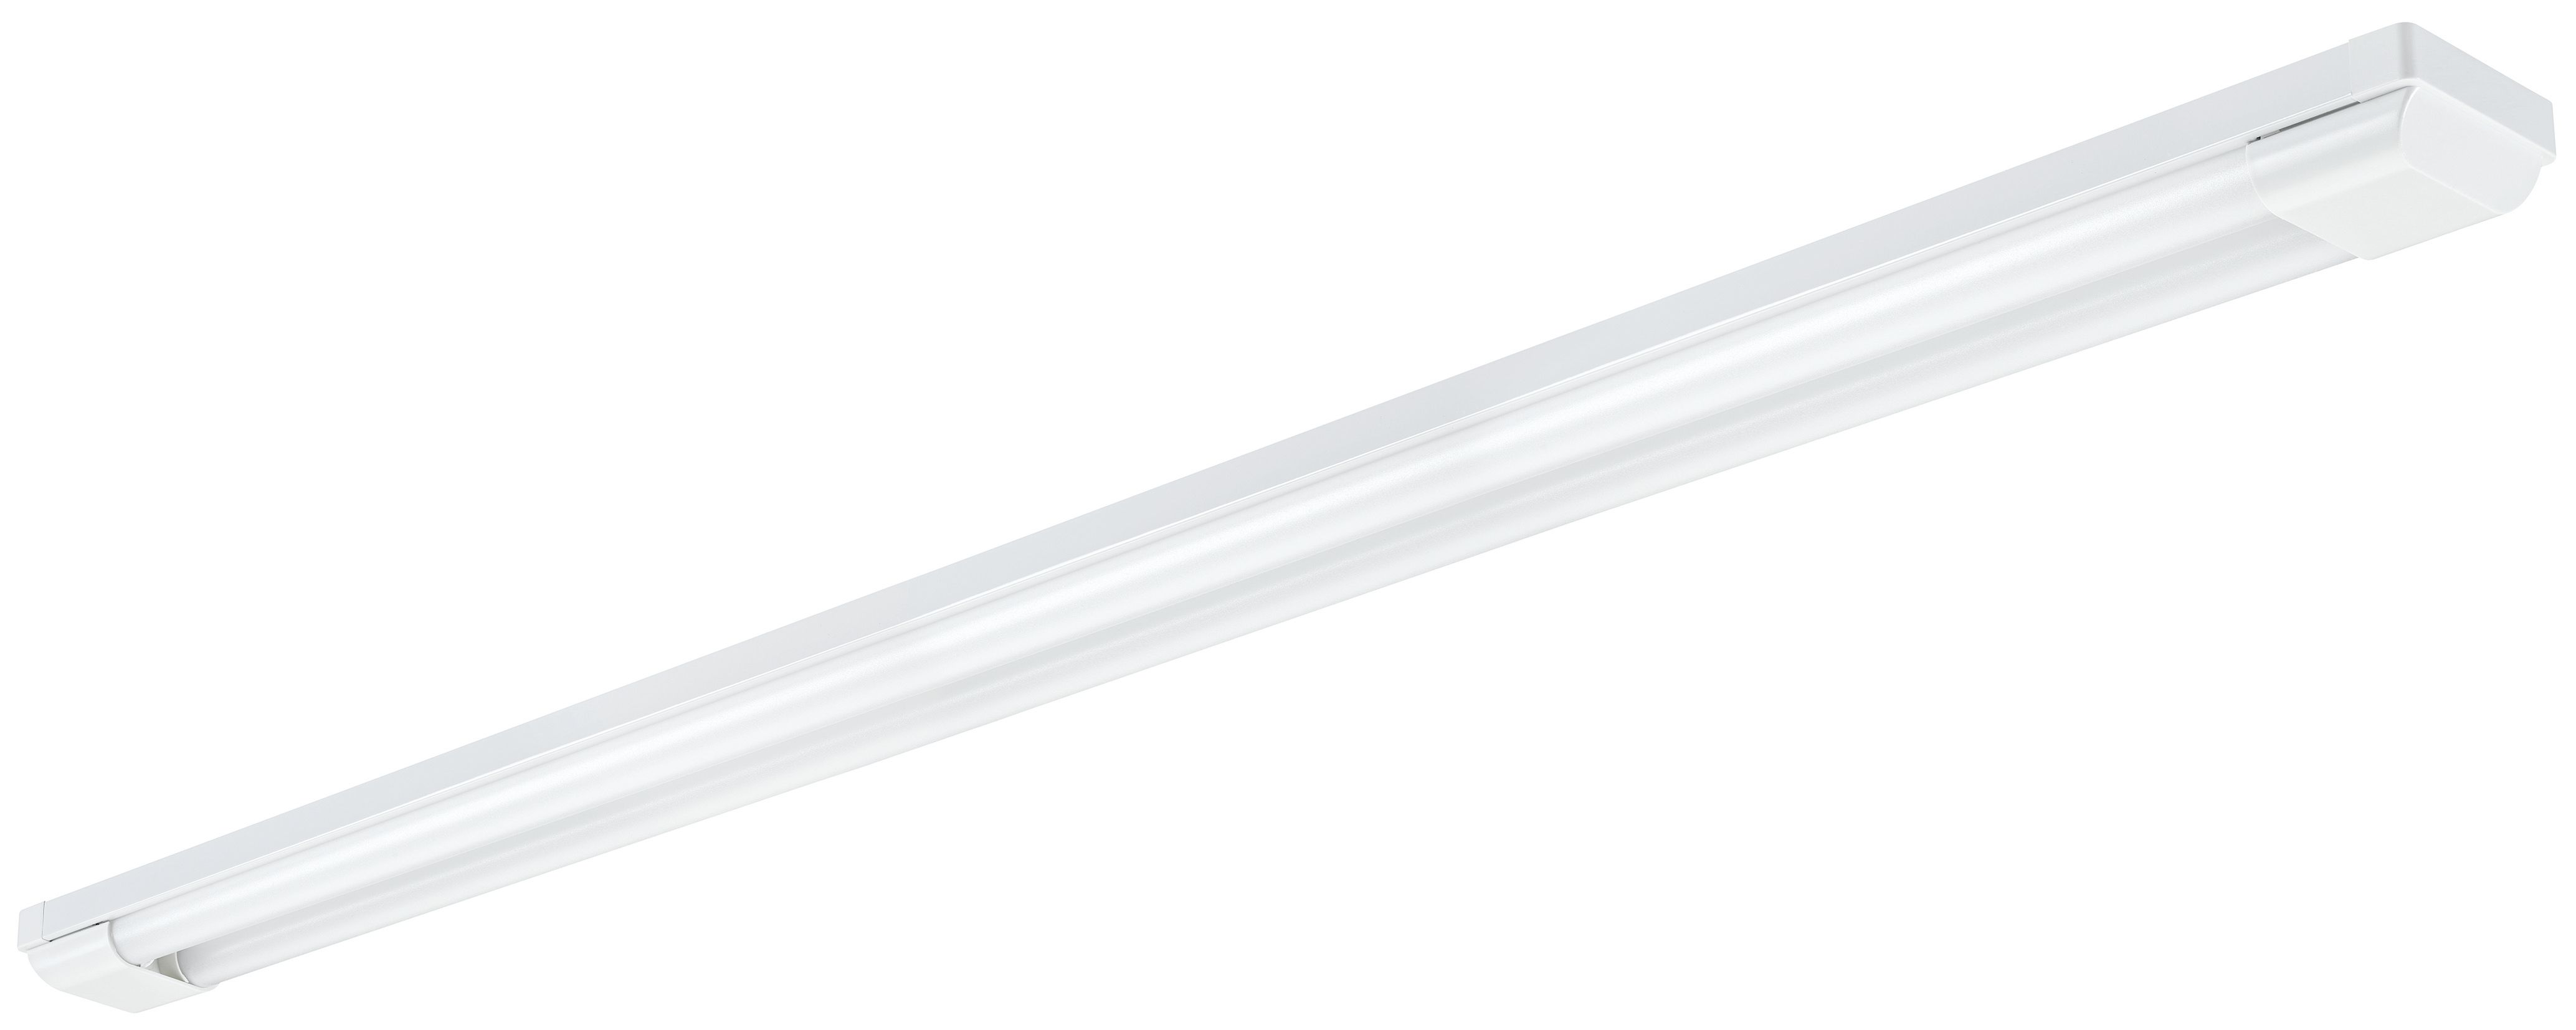 Image of Sylvania Twin 4ft IP20 Light Fitting with T8 Integrated LED Tube - 30W